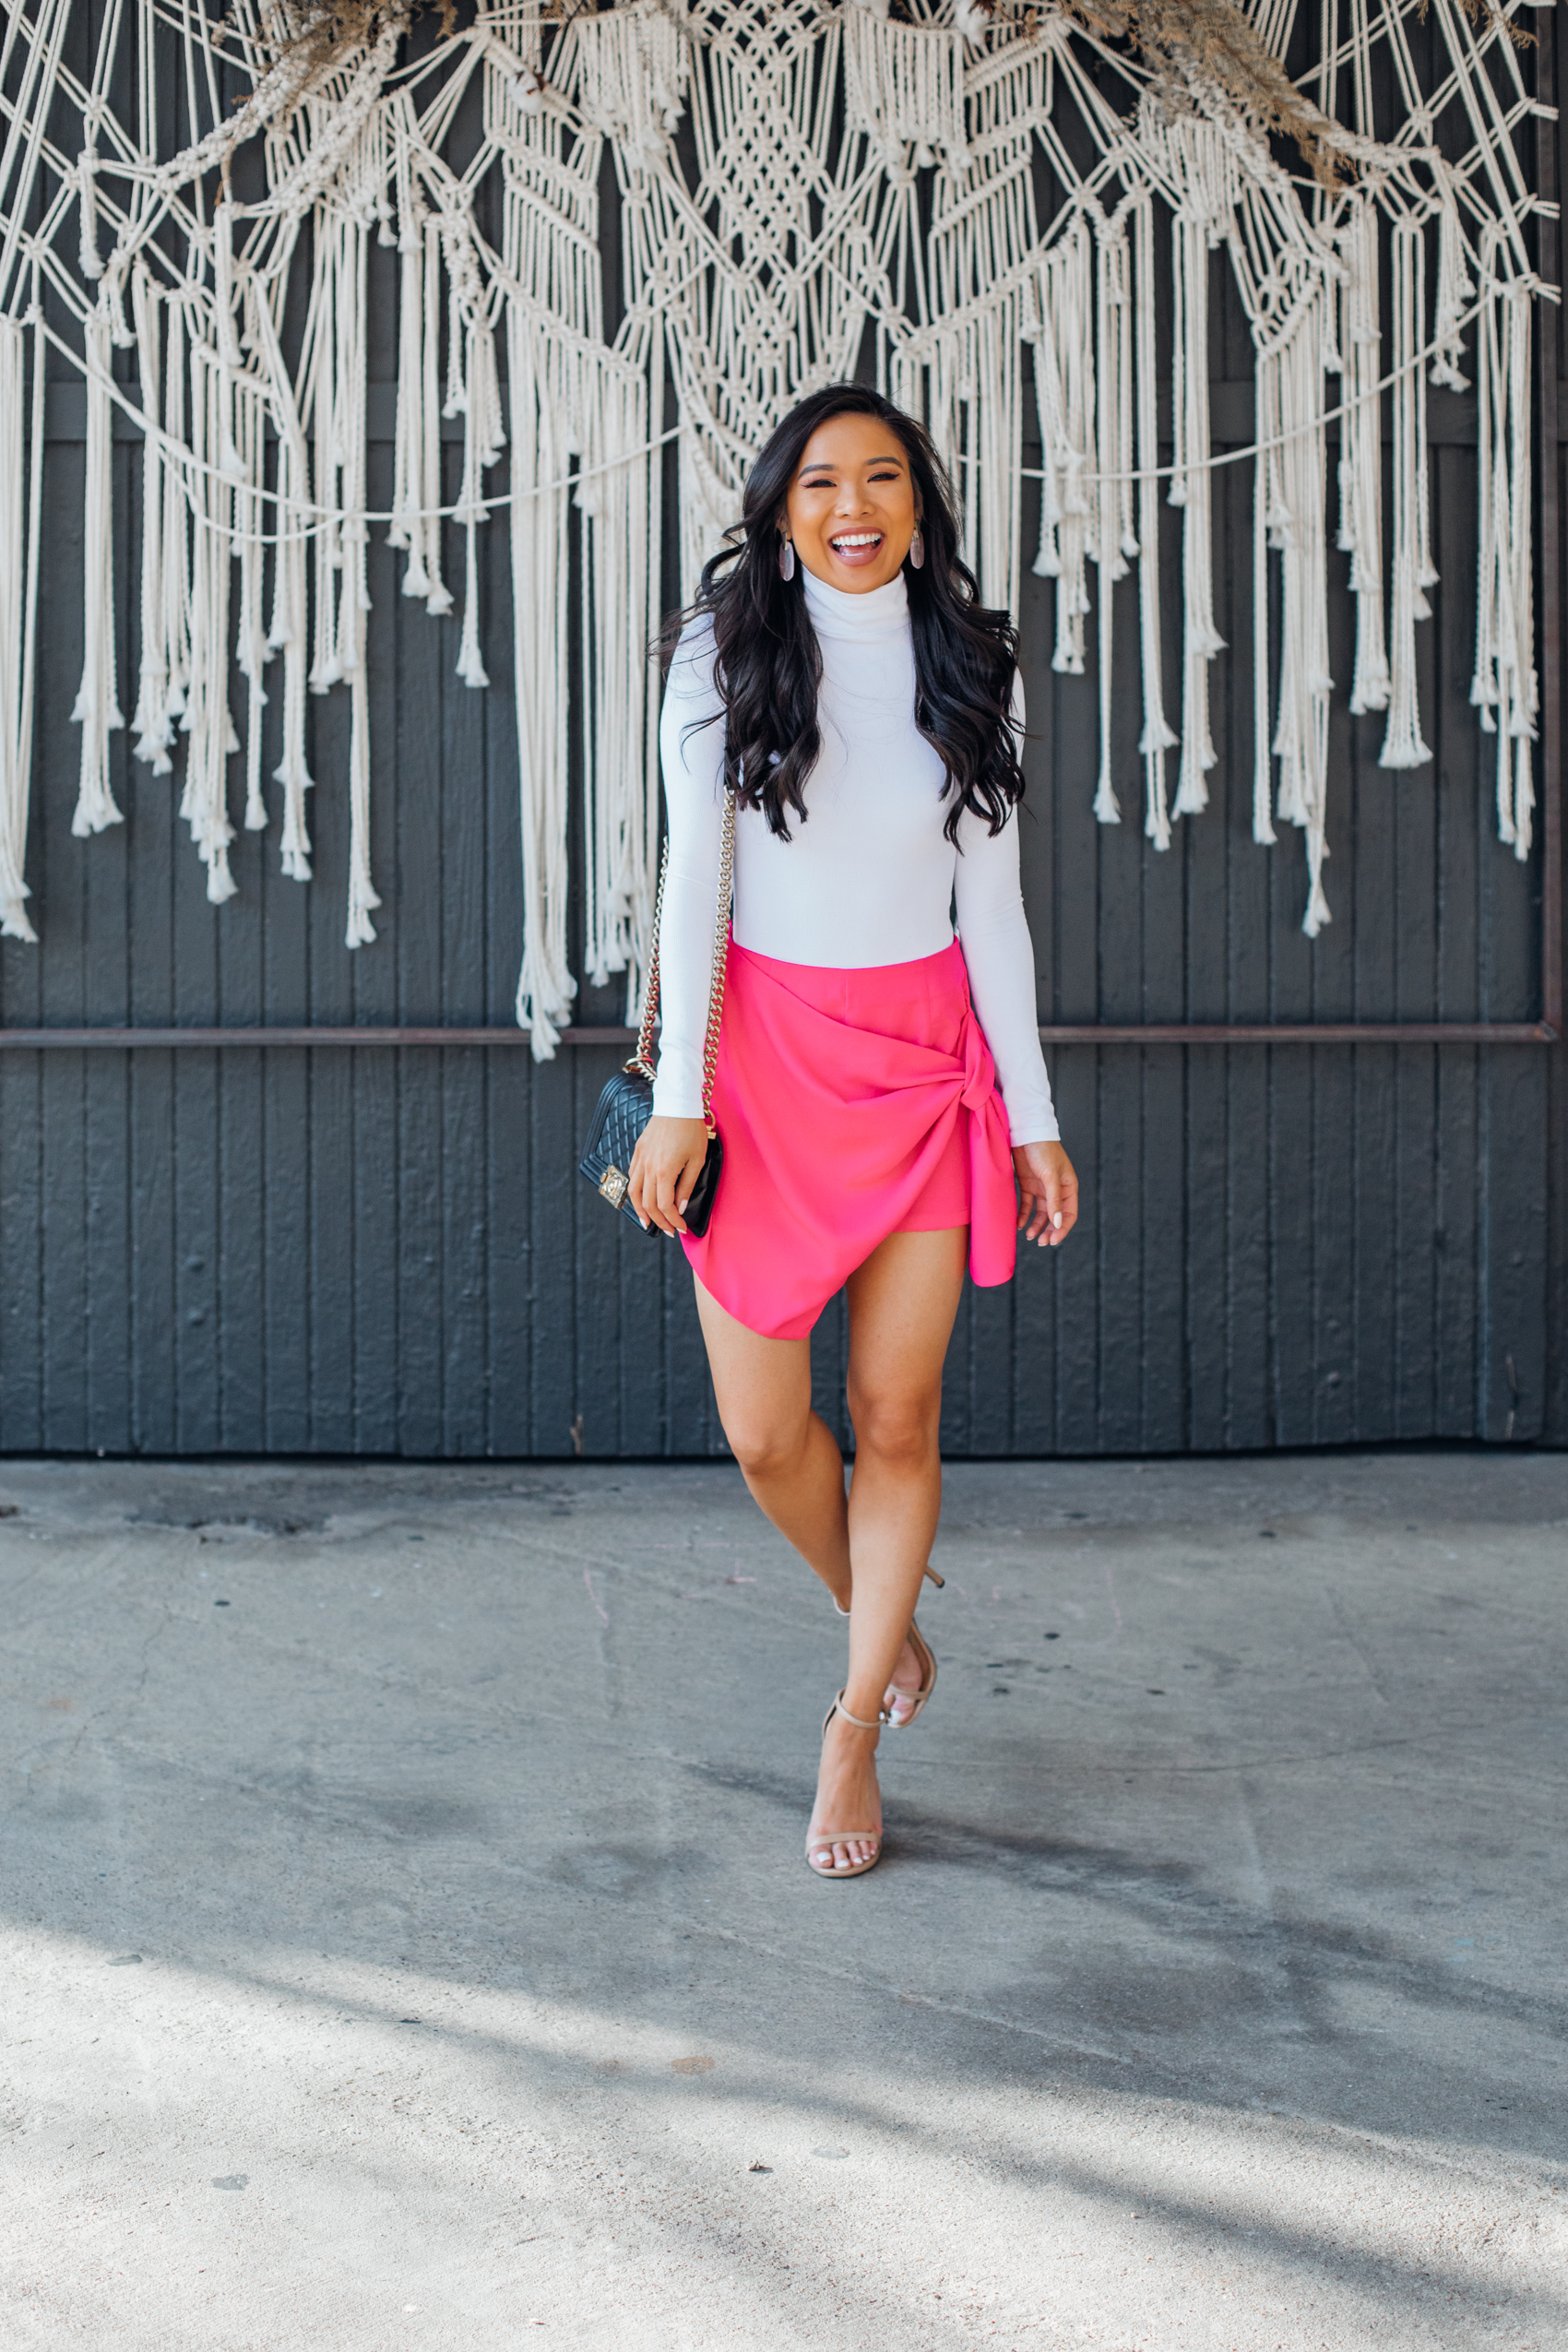 Blogger Hoang-Kim shares a Valentine's Day outfit idea featuring a pink skort